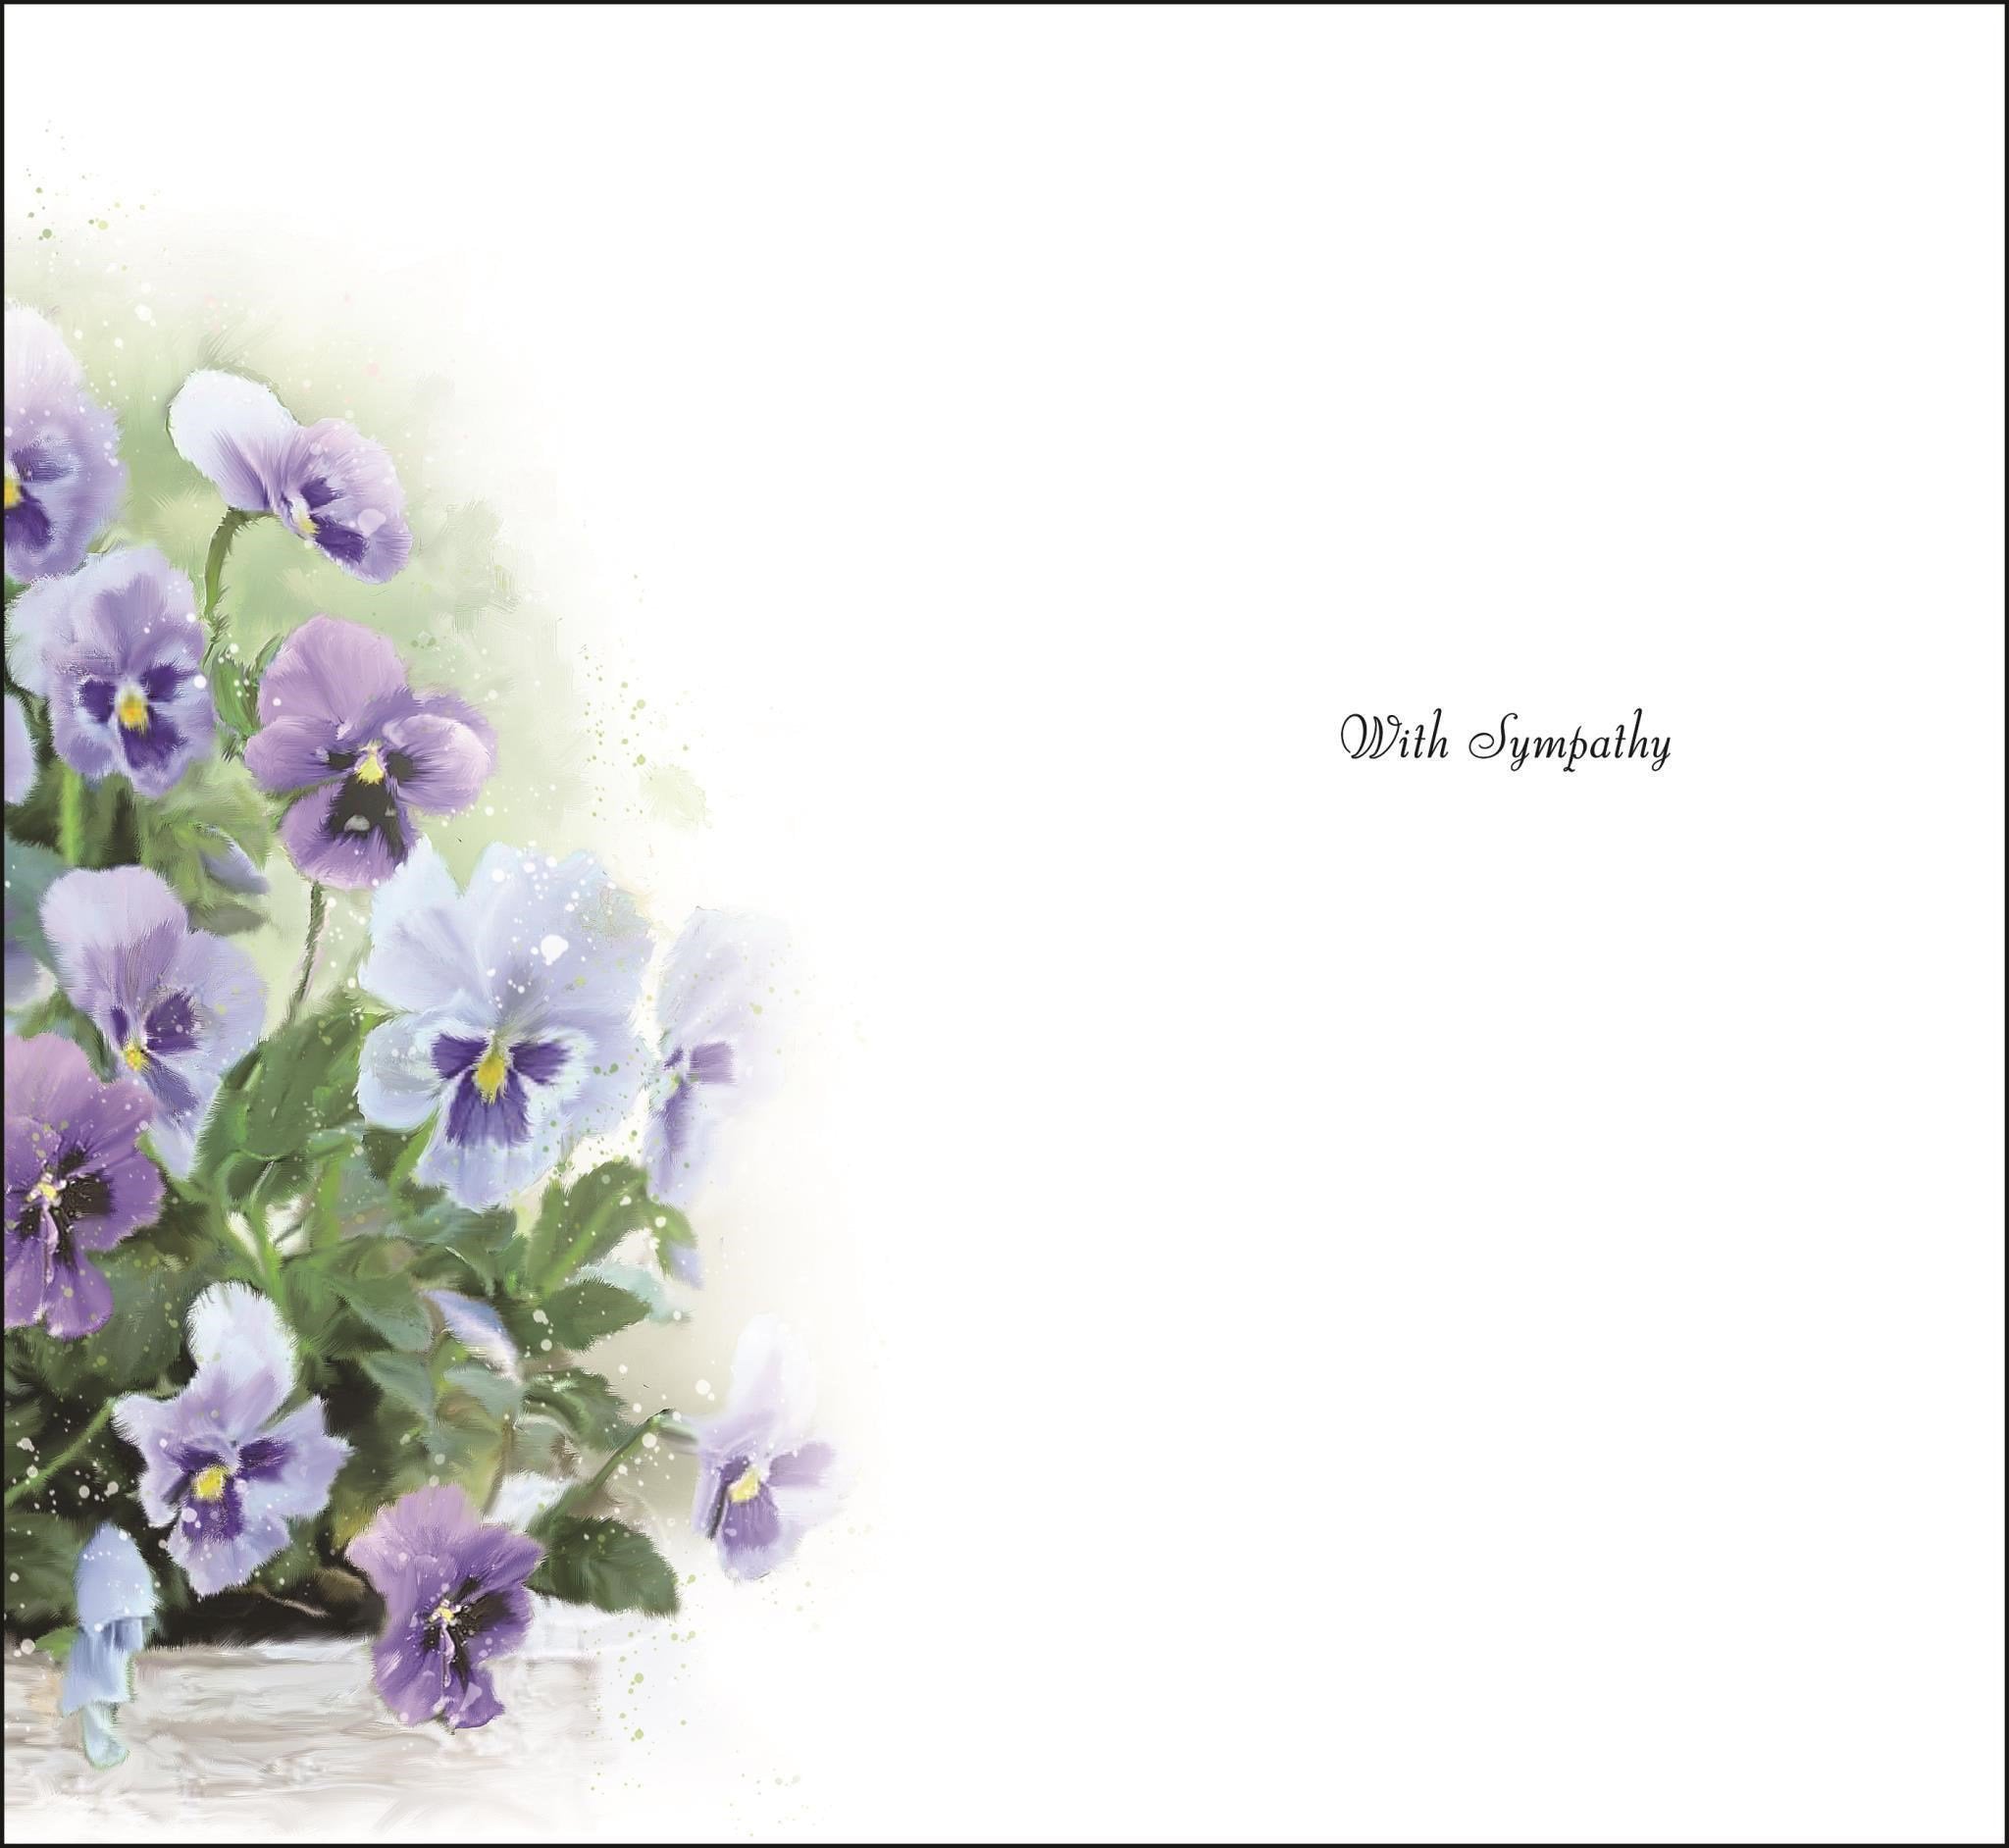 Inside of To You & Family Pansies Sympathy Greetings Card